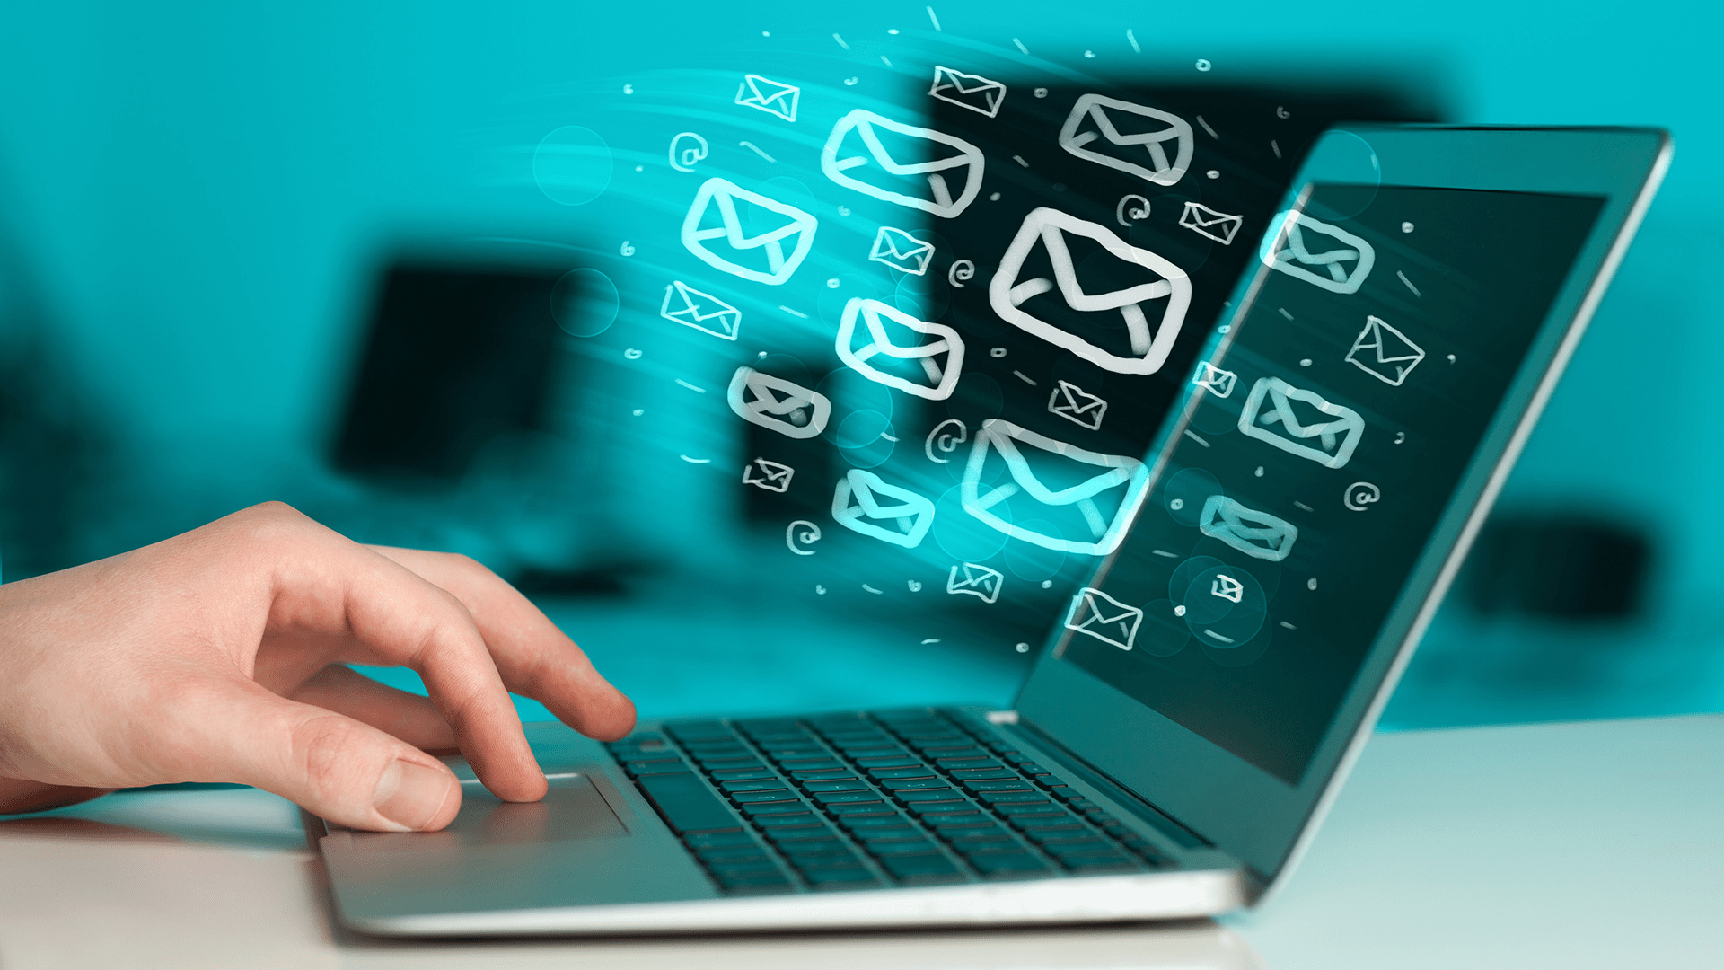 How Important Email Hosting in Business